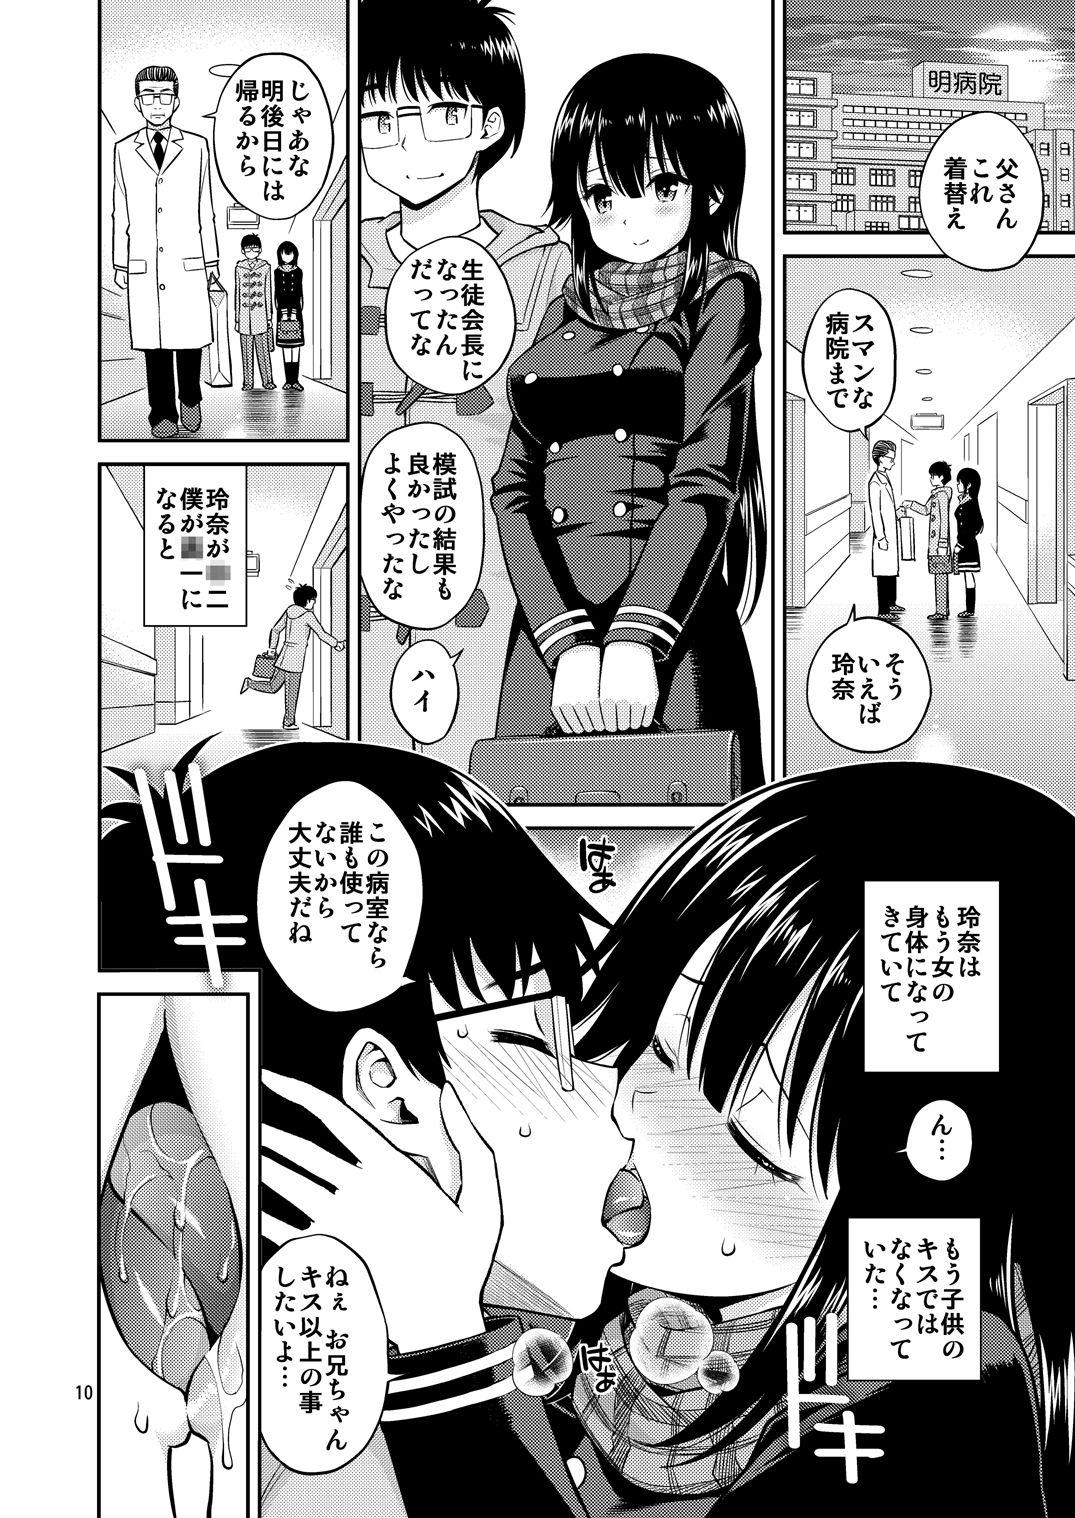 Ink Imouto to Uchi Kiss Publico - Page 10